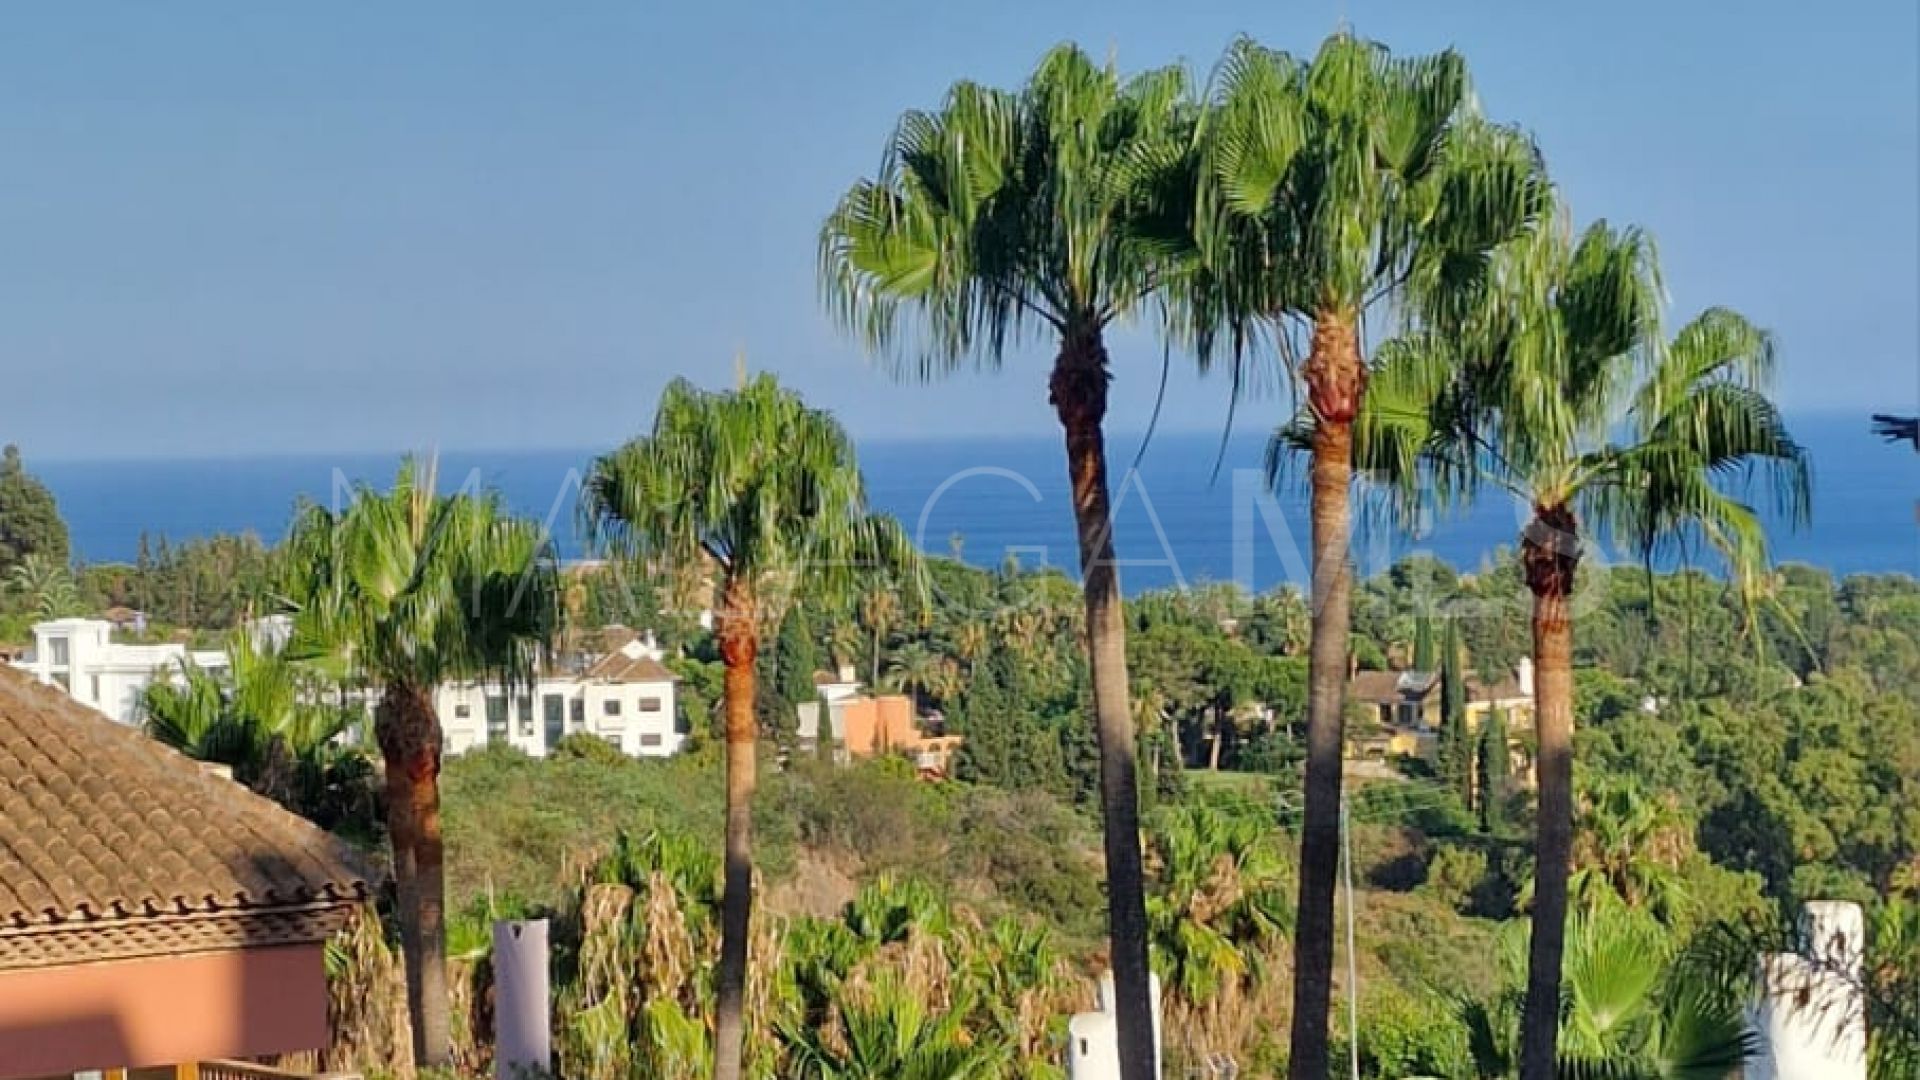 For sale apartment in Coto Real II with 2 bedrooms